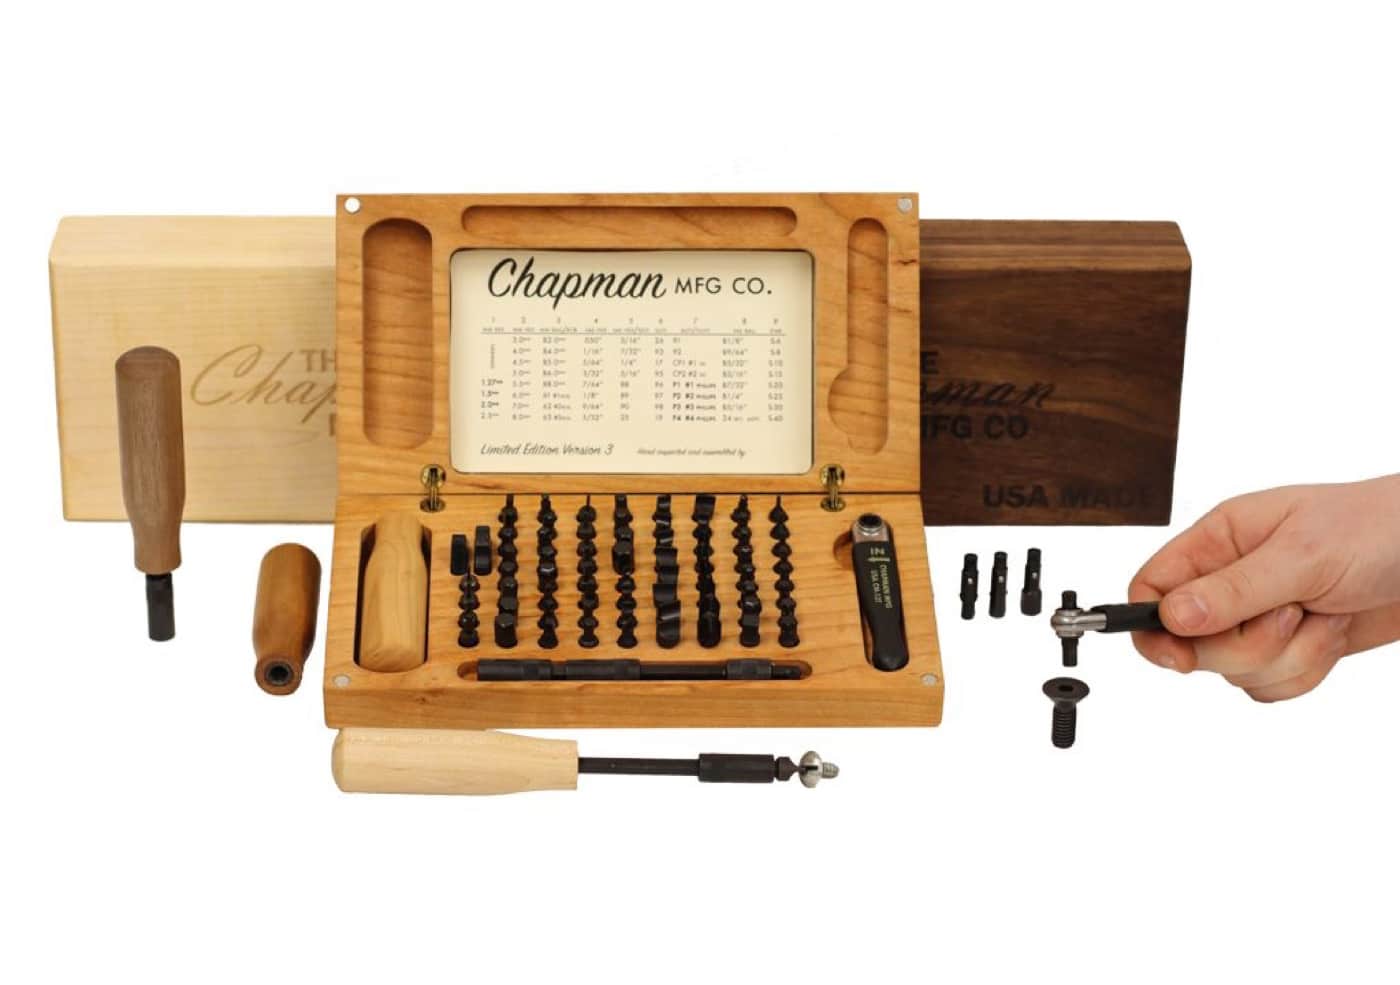 Chapman Manufacturing Wood Sets are heirloom-quality tool kits with wooden cases.